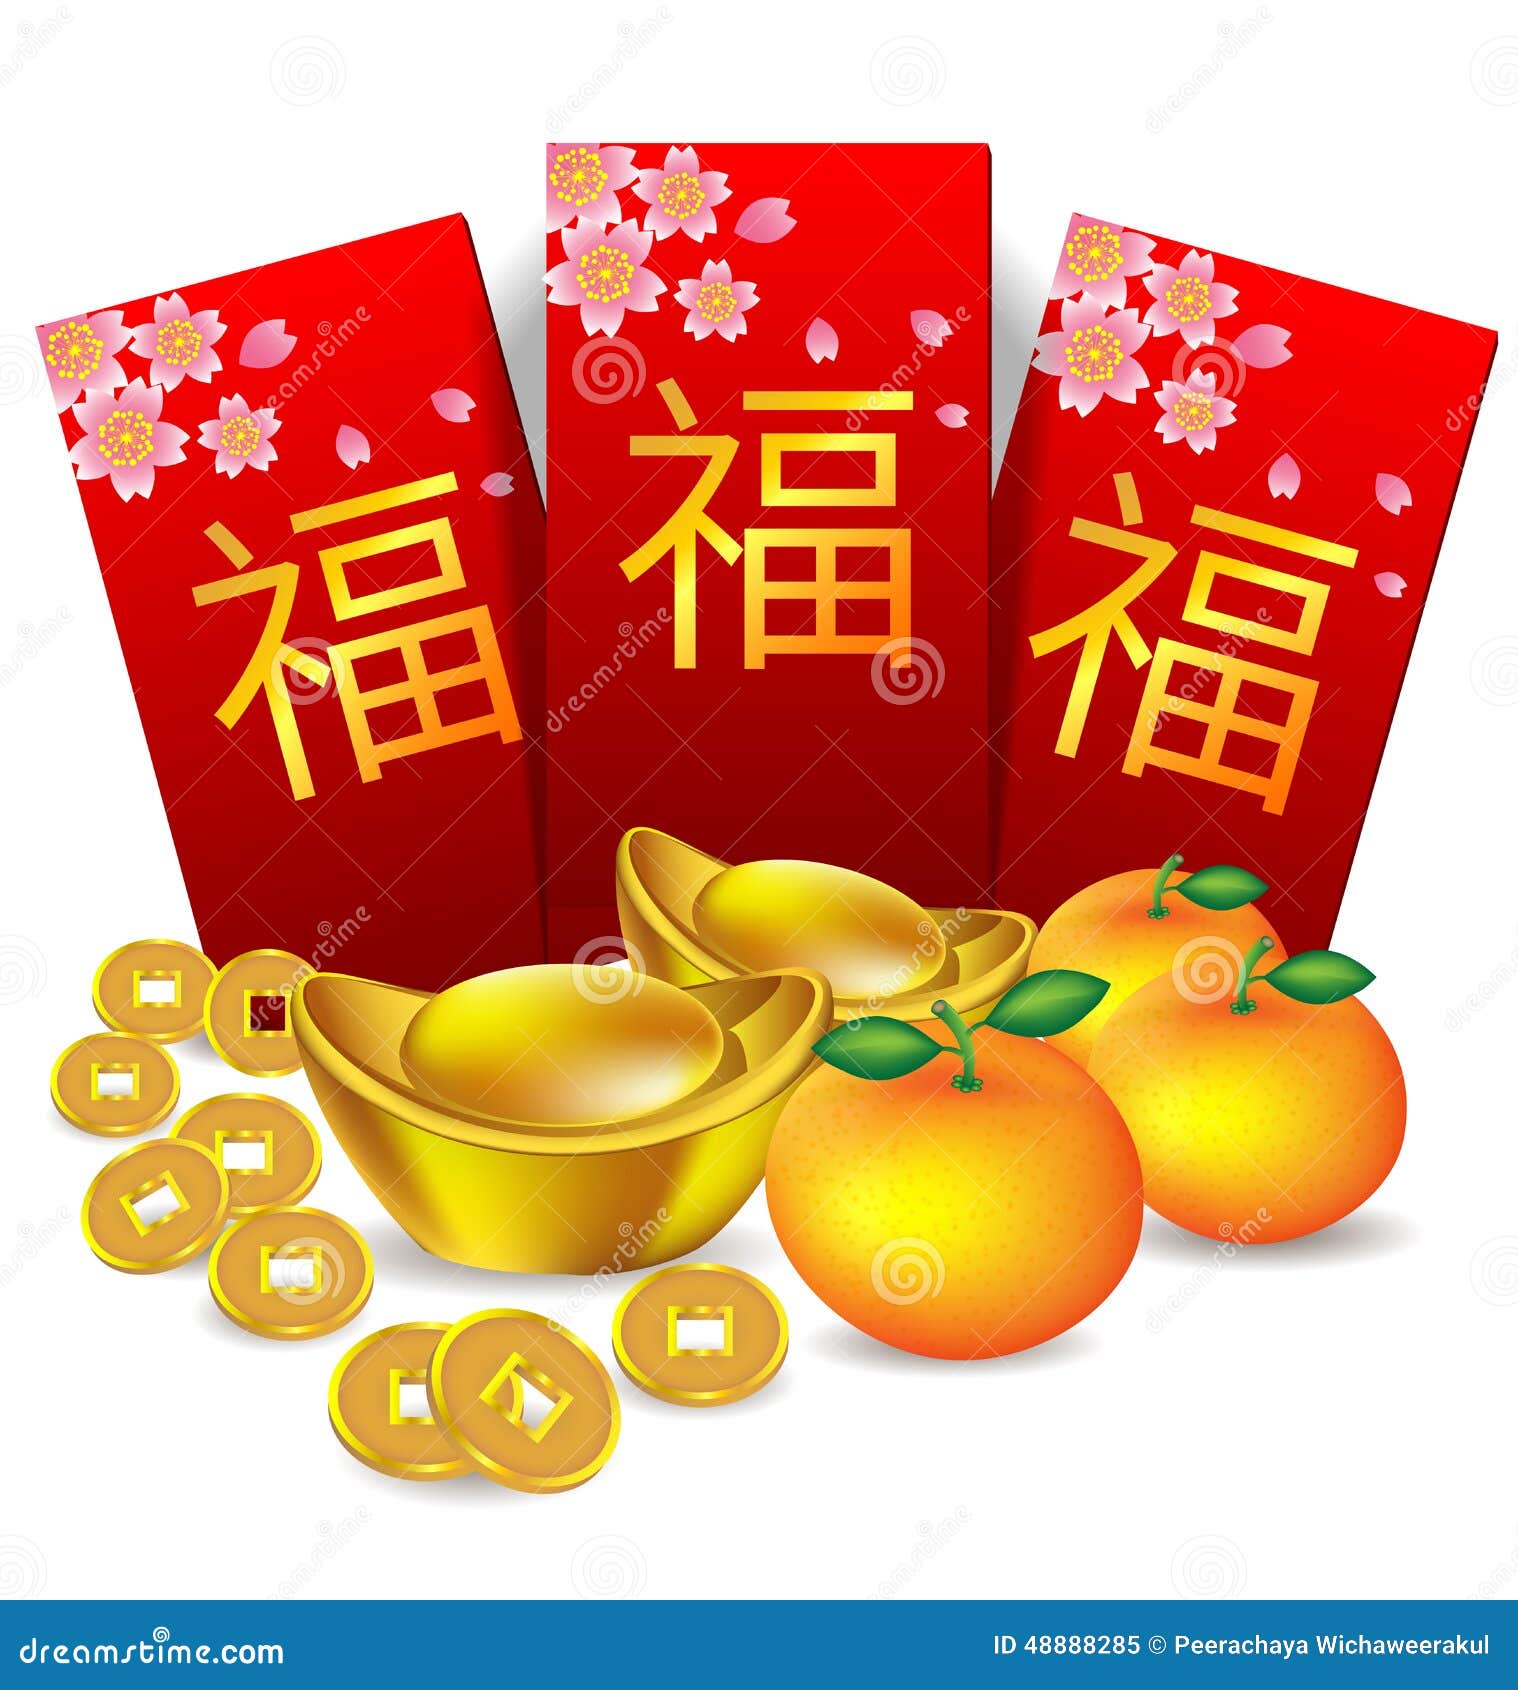 Red Packet Stock Illustrations 7 281 Red Packet Stock Illustrations Vectors Clipart Dreamstime